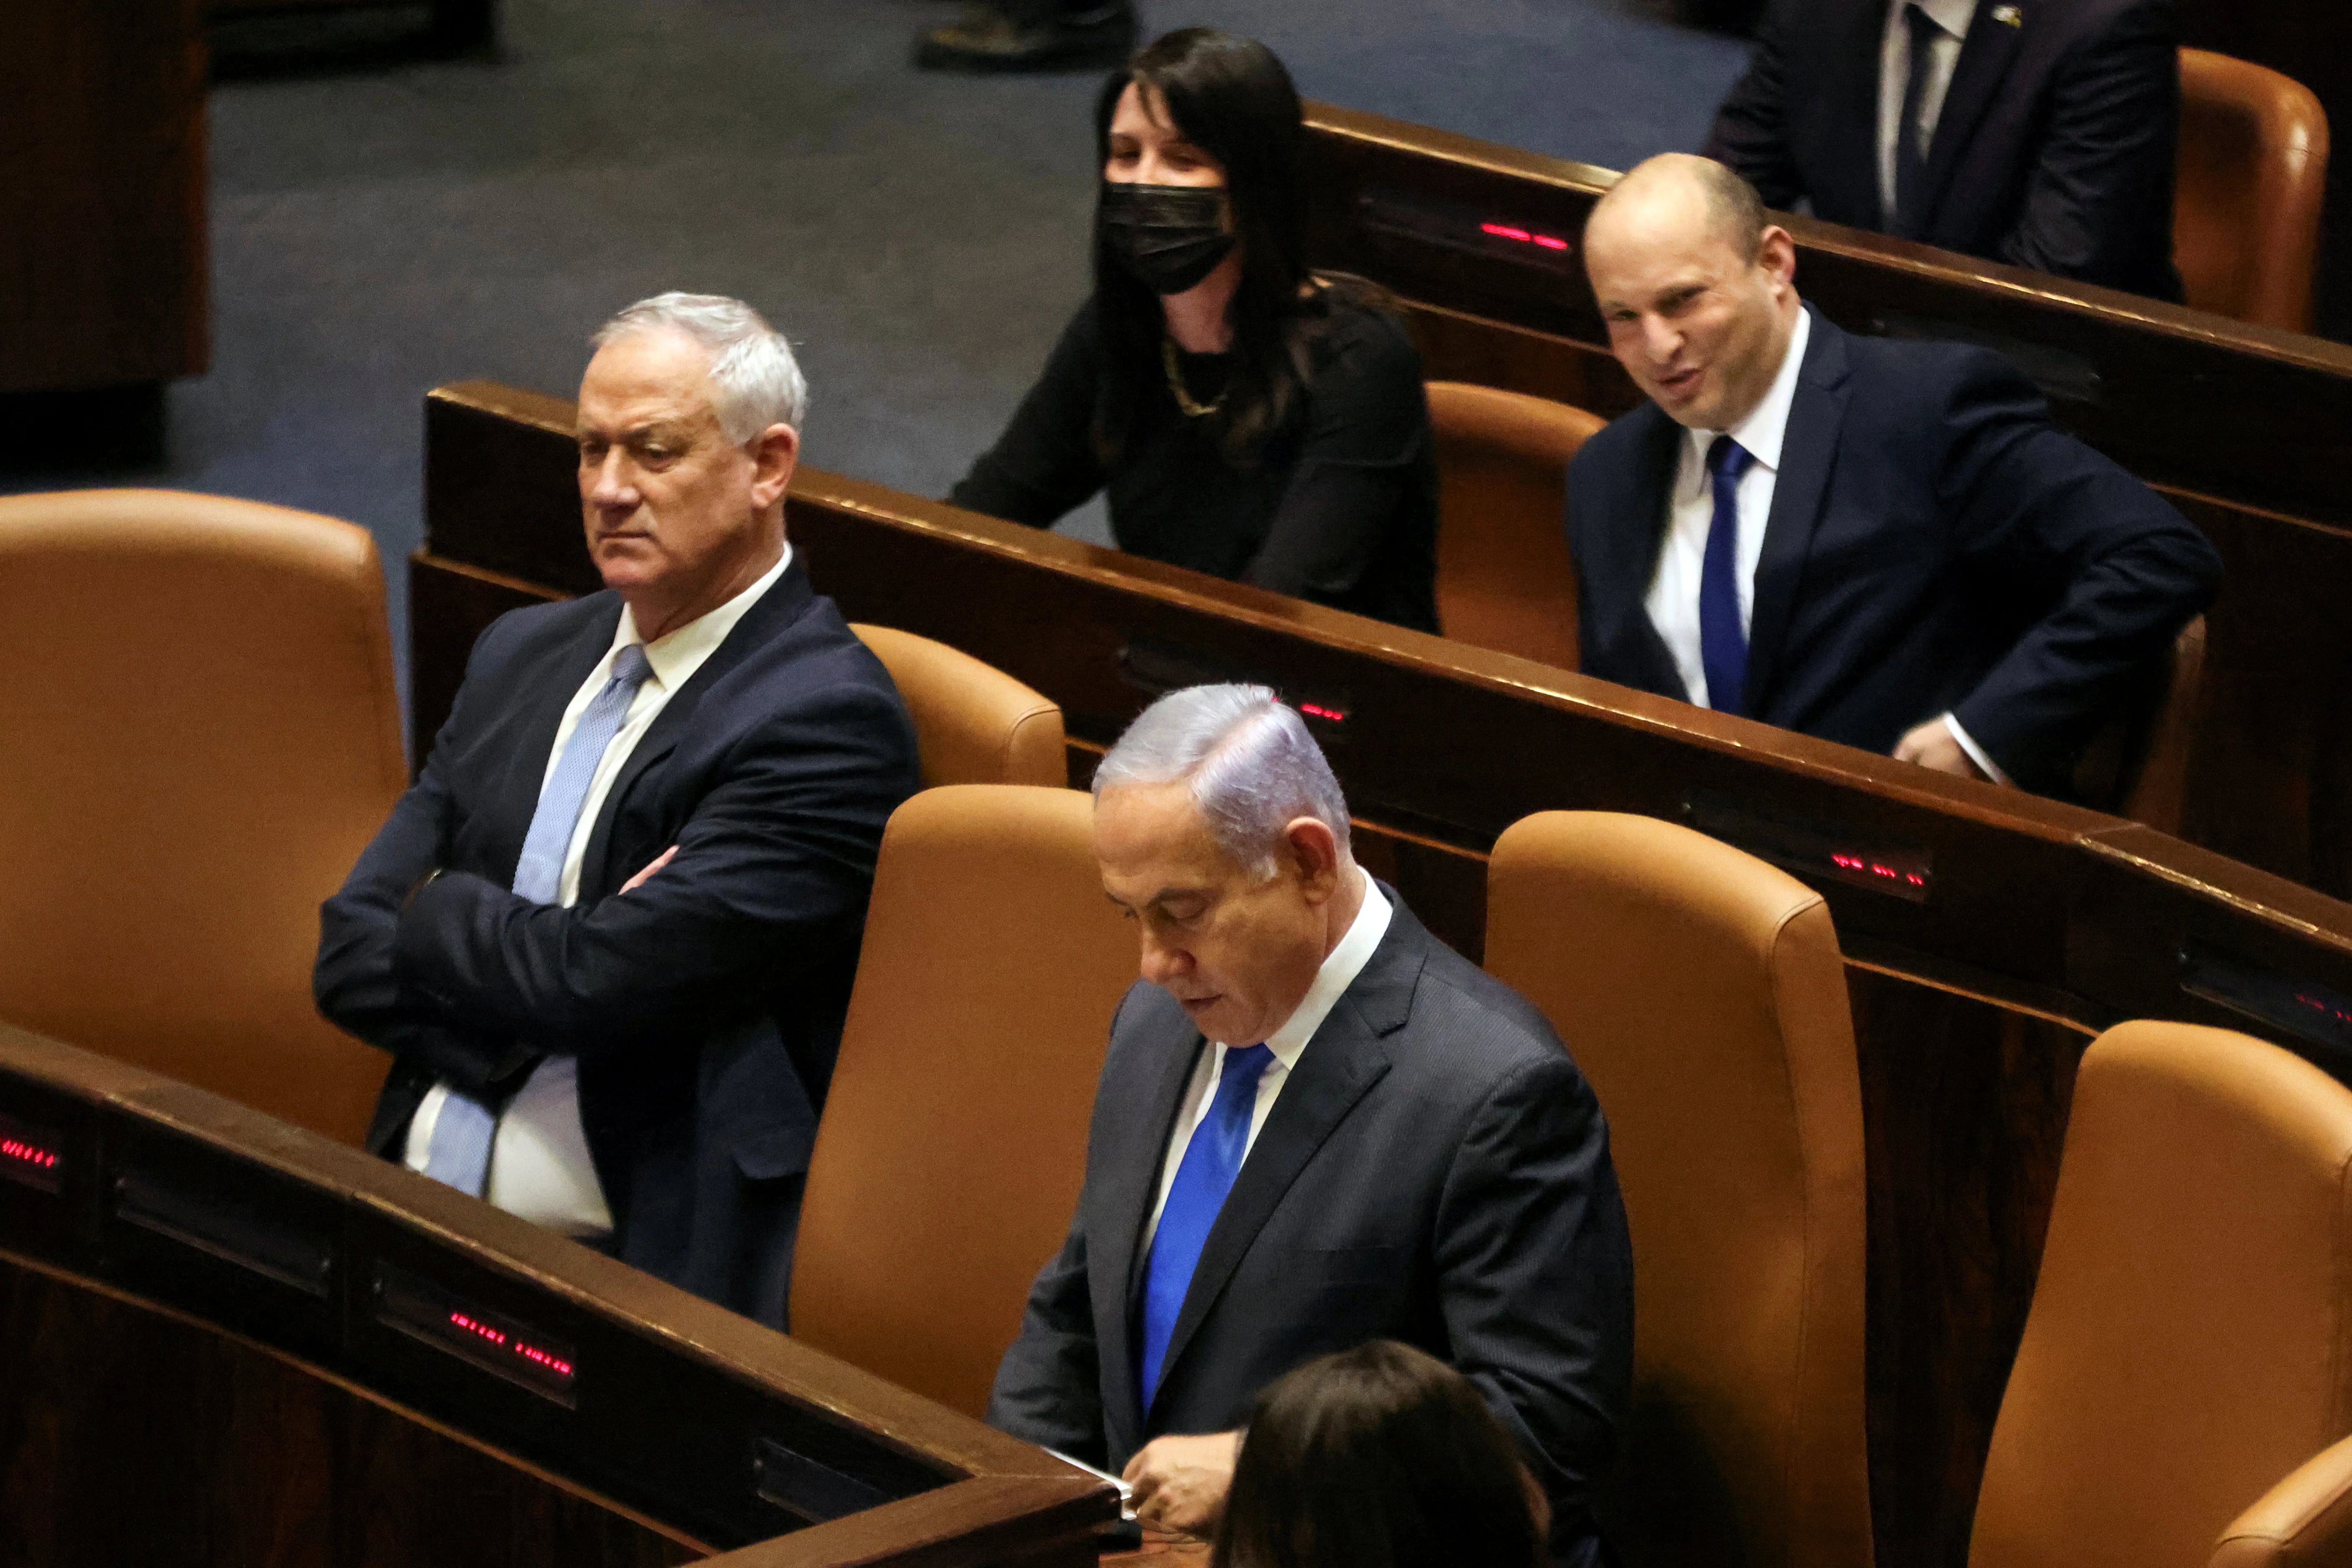 Naftali Bennett, Prime Minister-designate, Israeli Prime Minister Benjamin Netanyahu and Blue and White party leader Benny Gantz, sit nearby during a special session of the Knesset, Israel's parliament, to approve and swear-in a new coalition government, in Jerusalem June 13, 2021. REUTERS/Ronen Zvulun